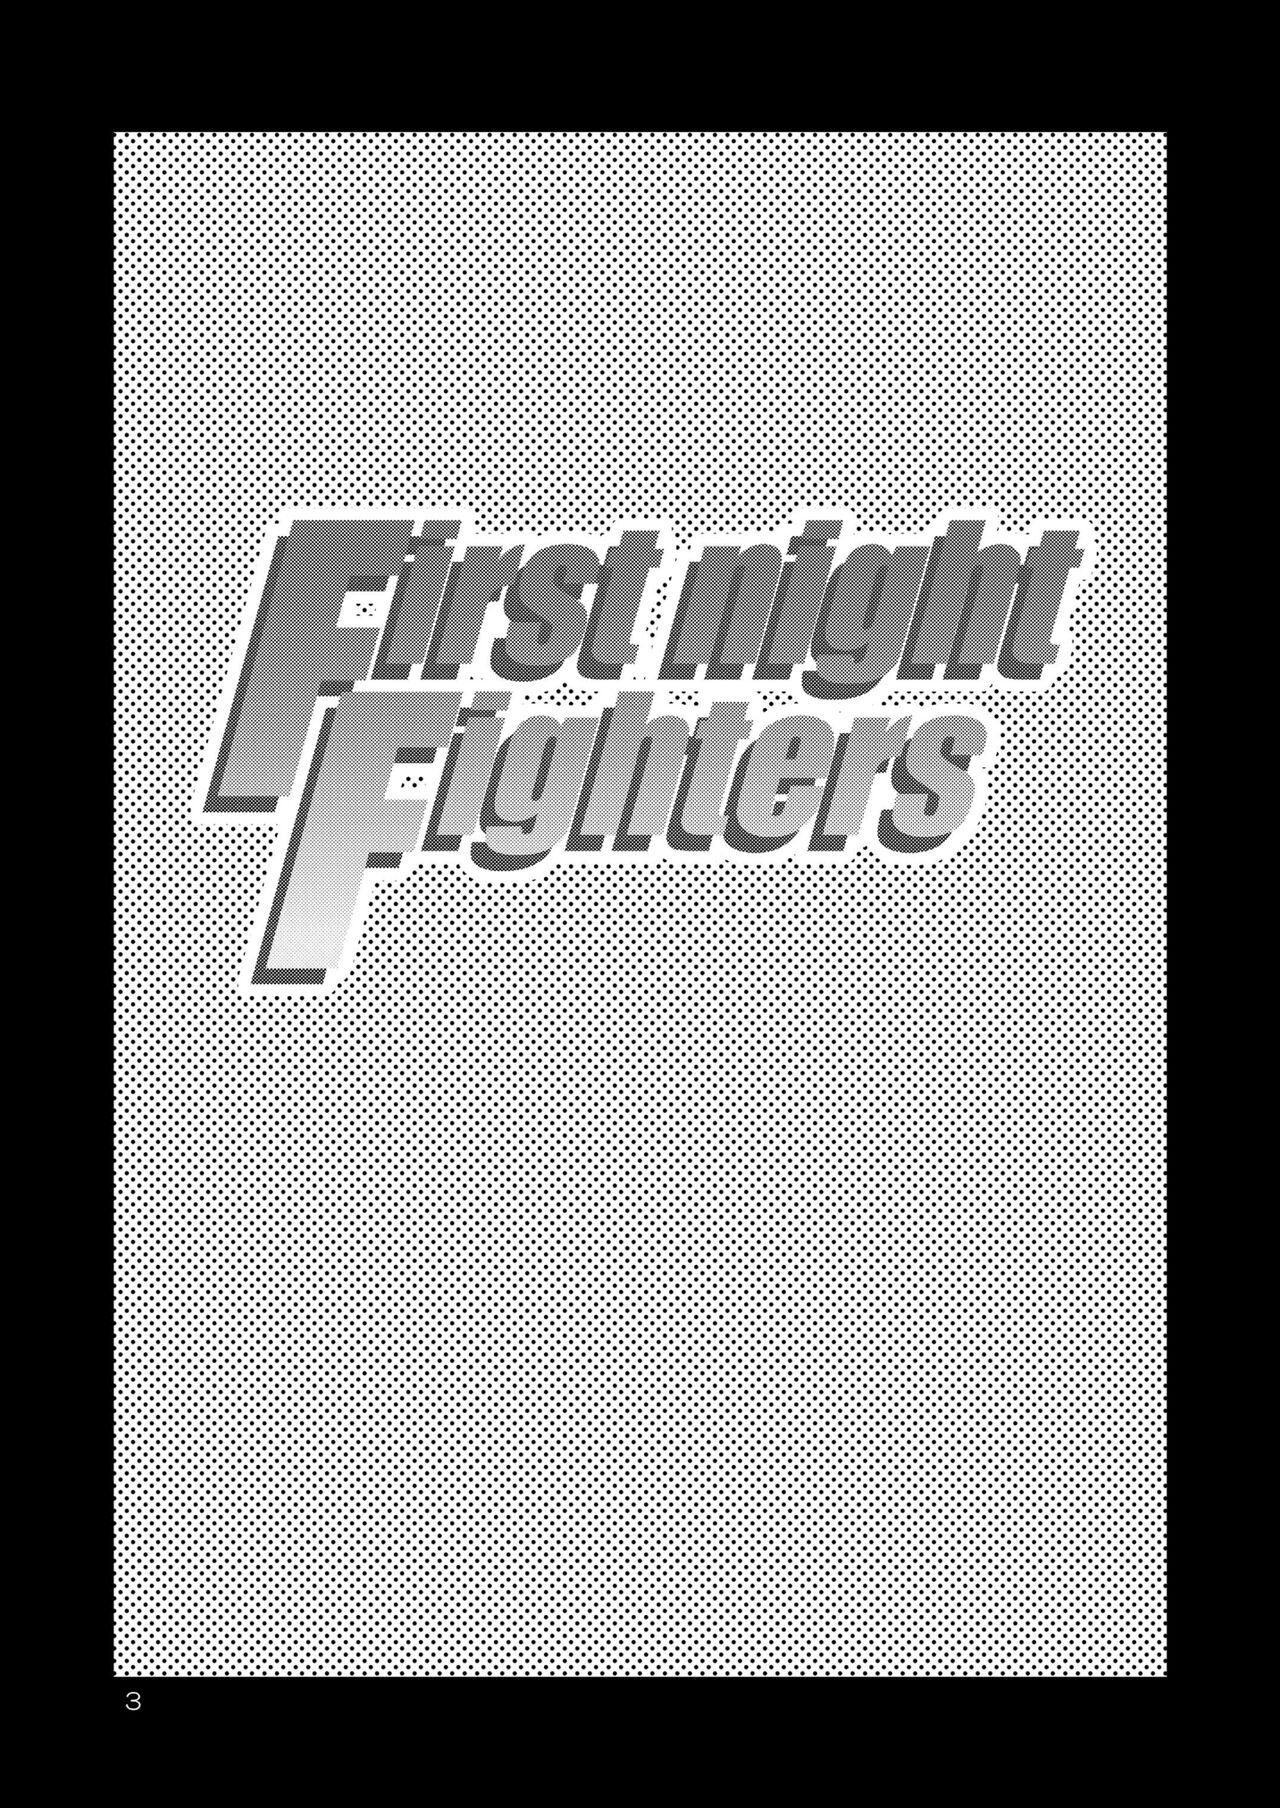 FIrst night Fighters 2